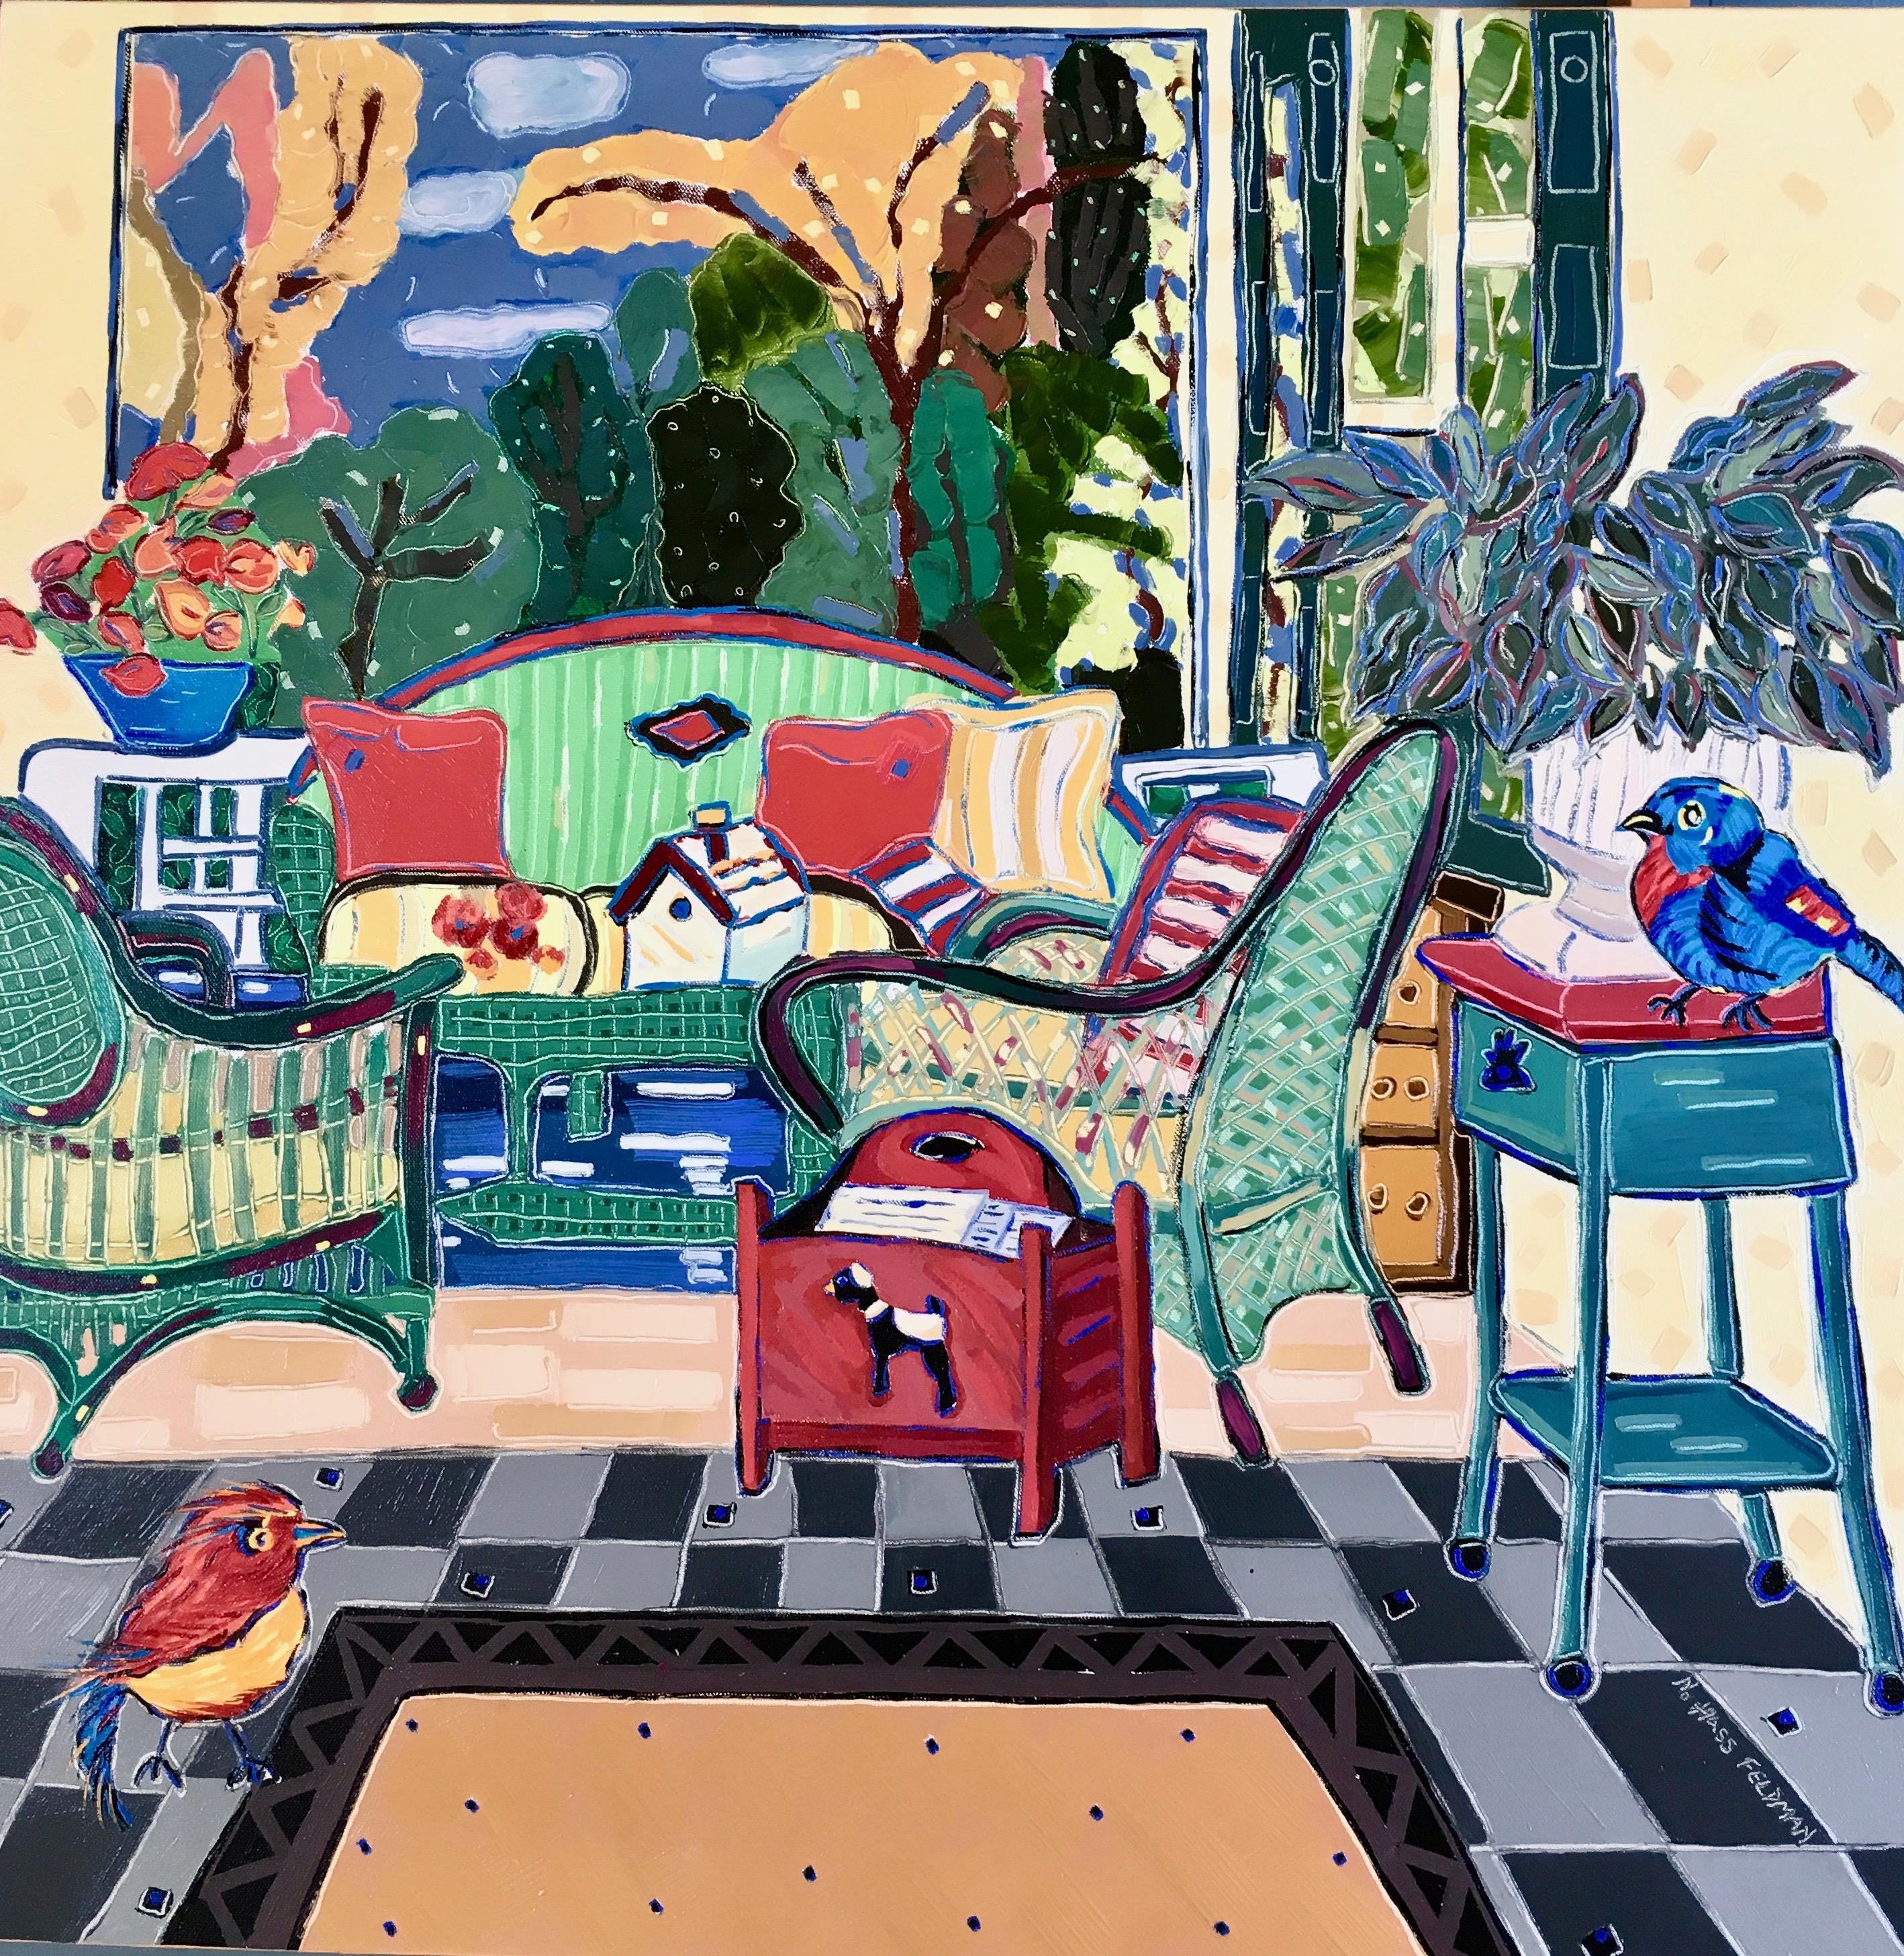 Nan Hass Feldman's “Jodi and Sam Gaze at the Birdhouse" is a 30 x 30 x 2 inch oil painting on canvas that is from The Interiors series inspired by a visits to the homes of various friends and recommendations of friends to paint my interpretations of